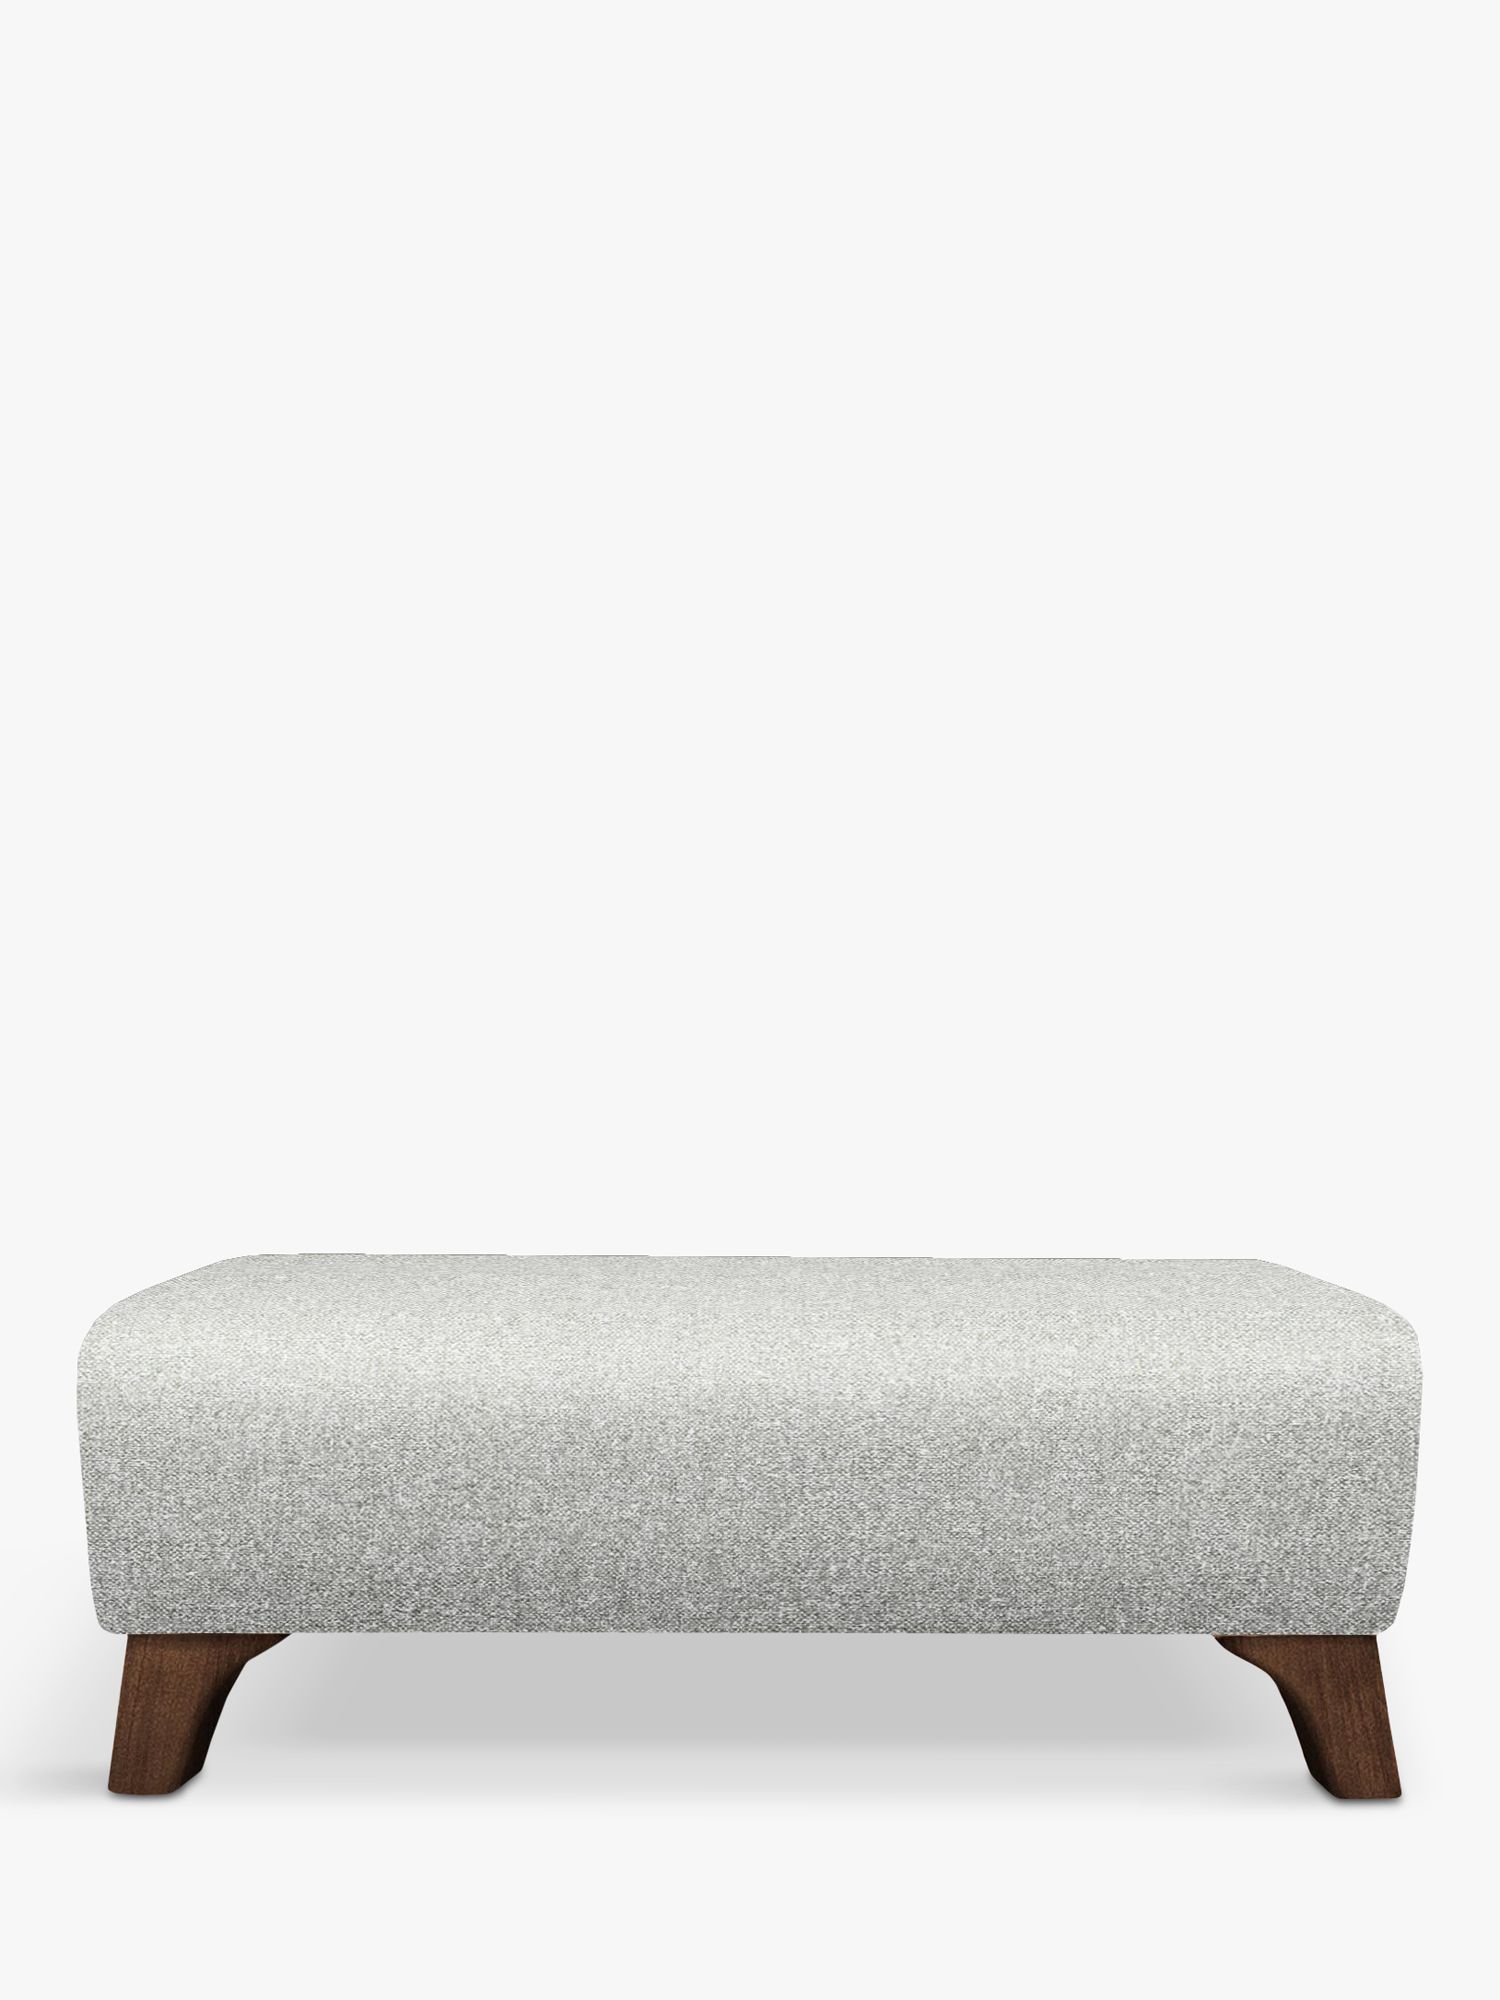 The Sixty Eight Range, G Plan Vintage The Sixty Eight Footstool, Tweed Cloud